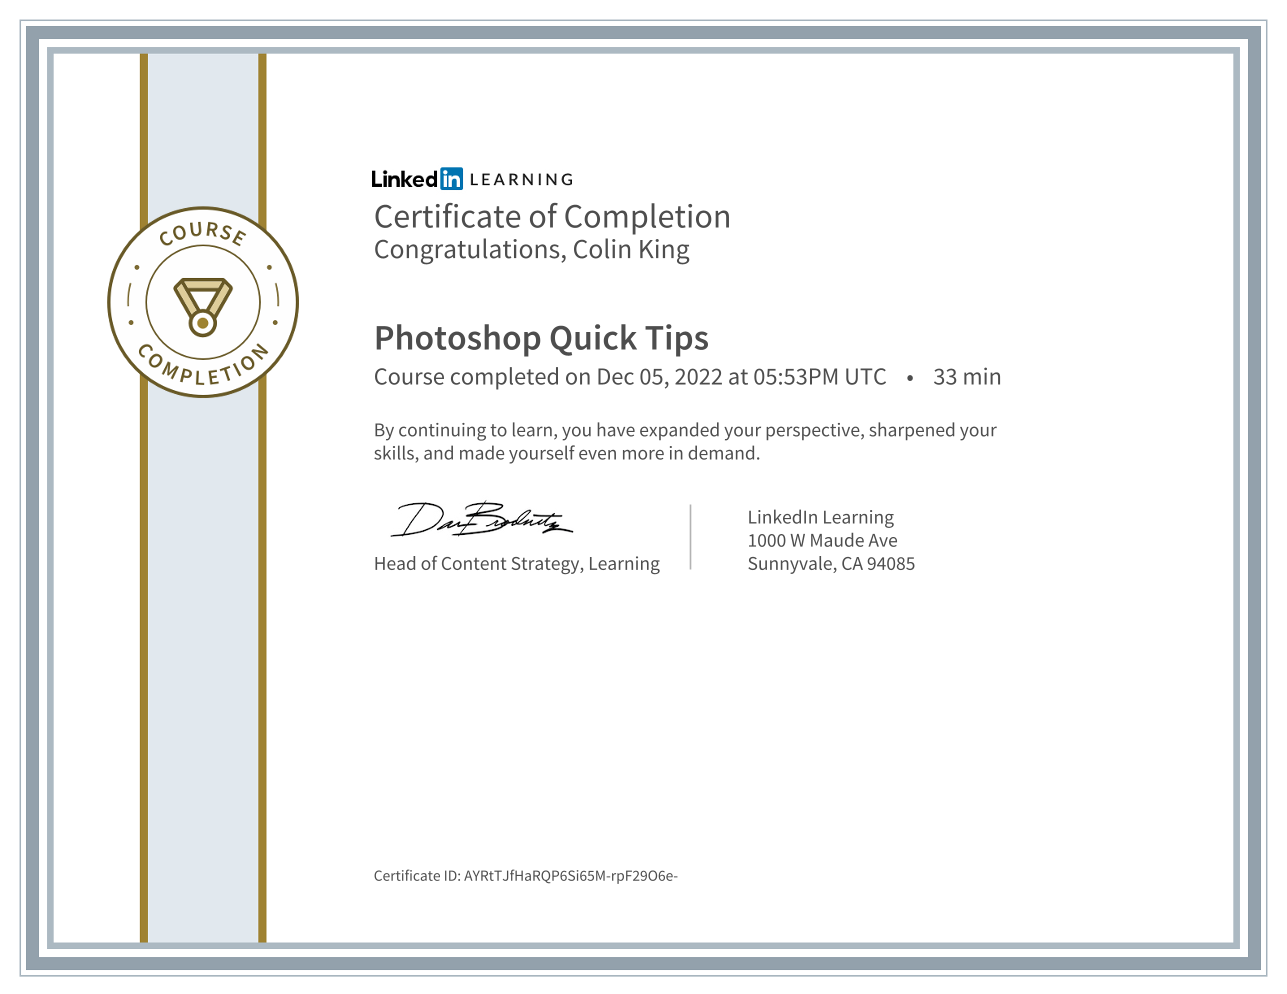 Photoshop Quick Tips certificate